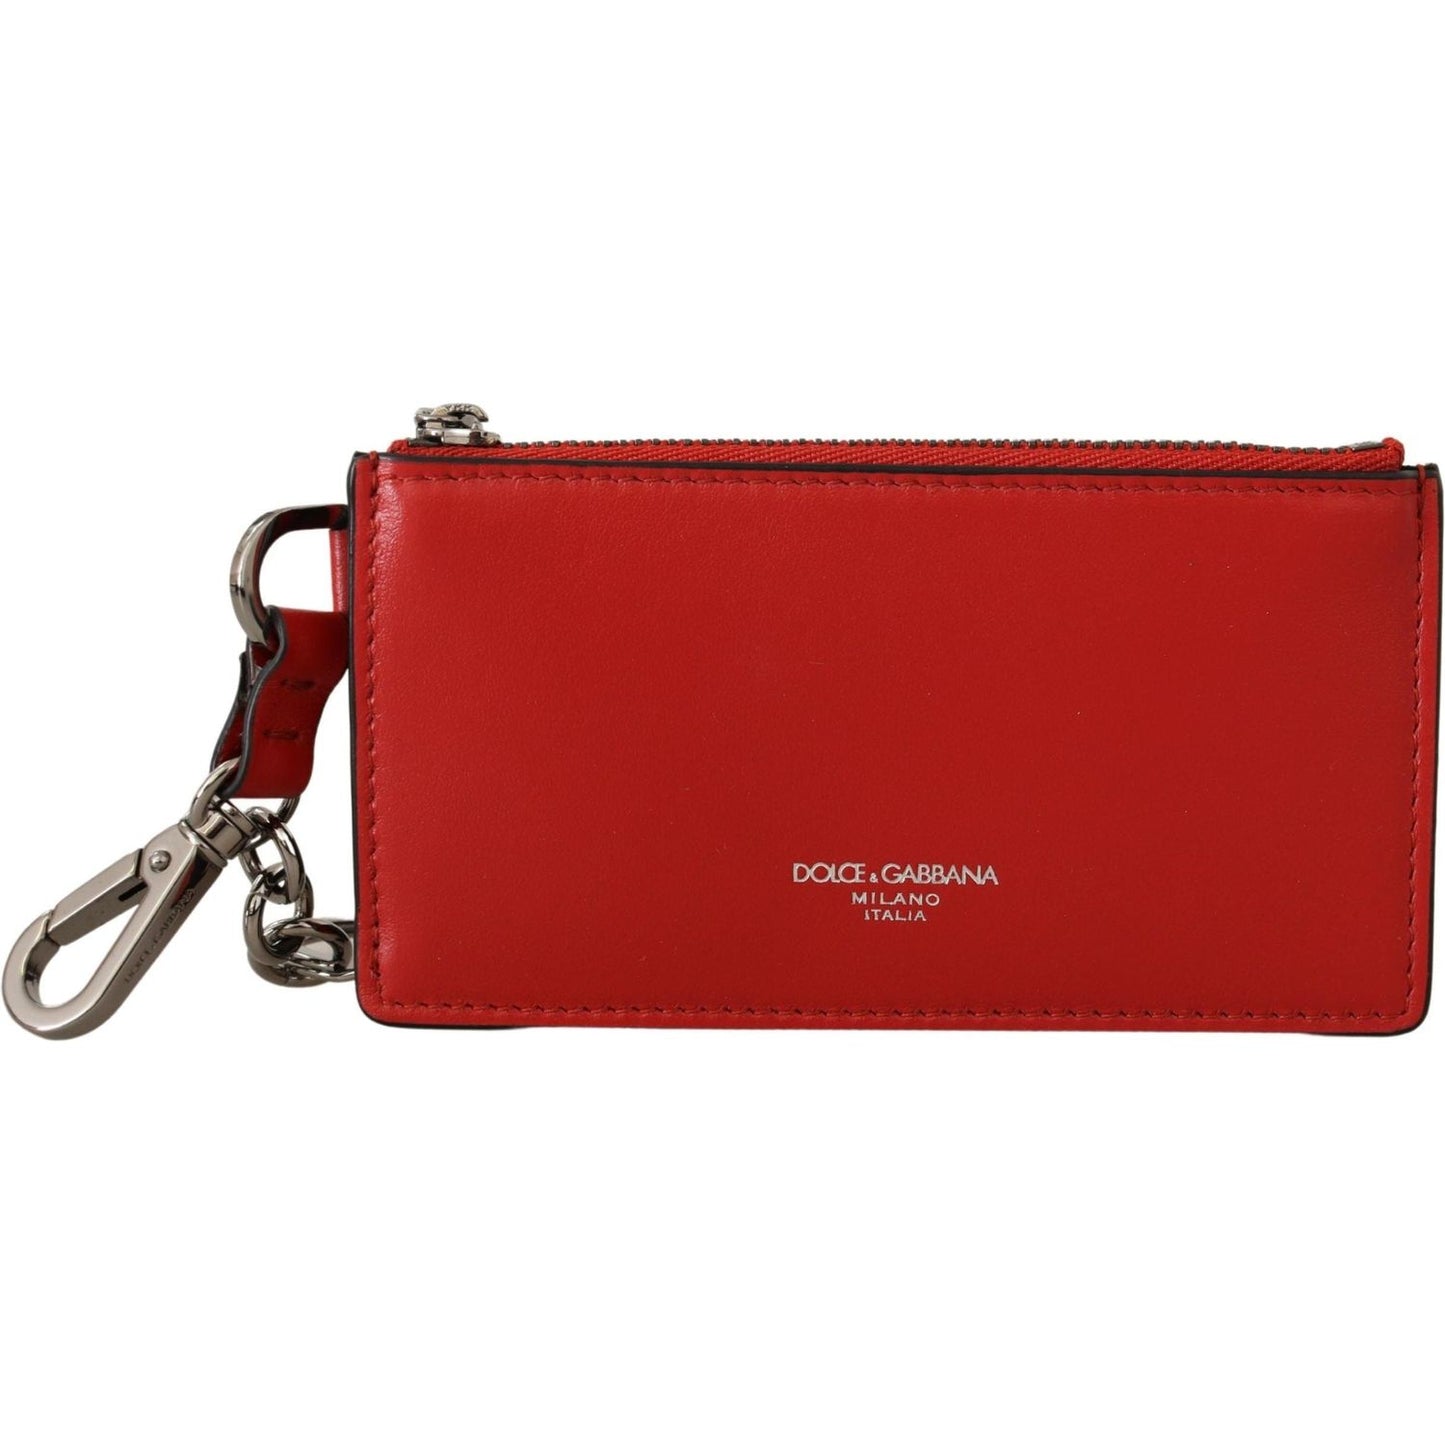 Dolce & Gabbana Elegant Leather Keychain in Vibrant Red red-leather-purse-silver-tone-keychain IMG_7532-scaled-5c39f955-967.jpg